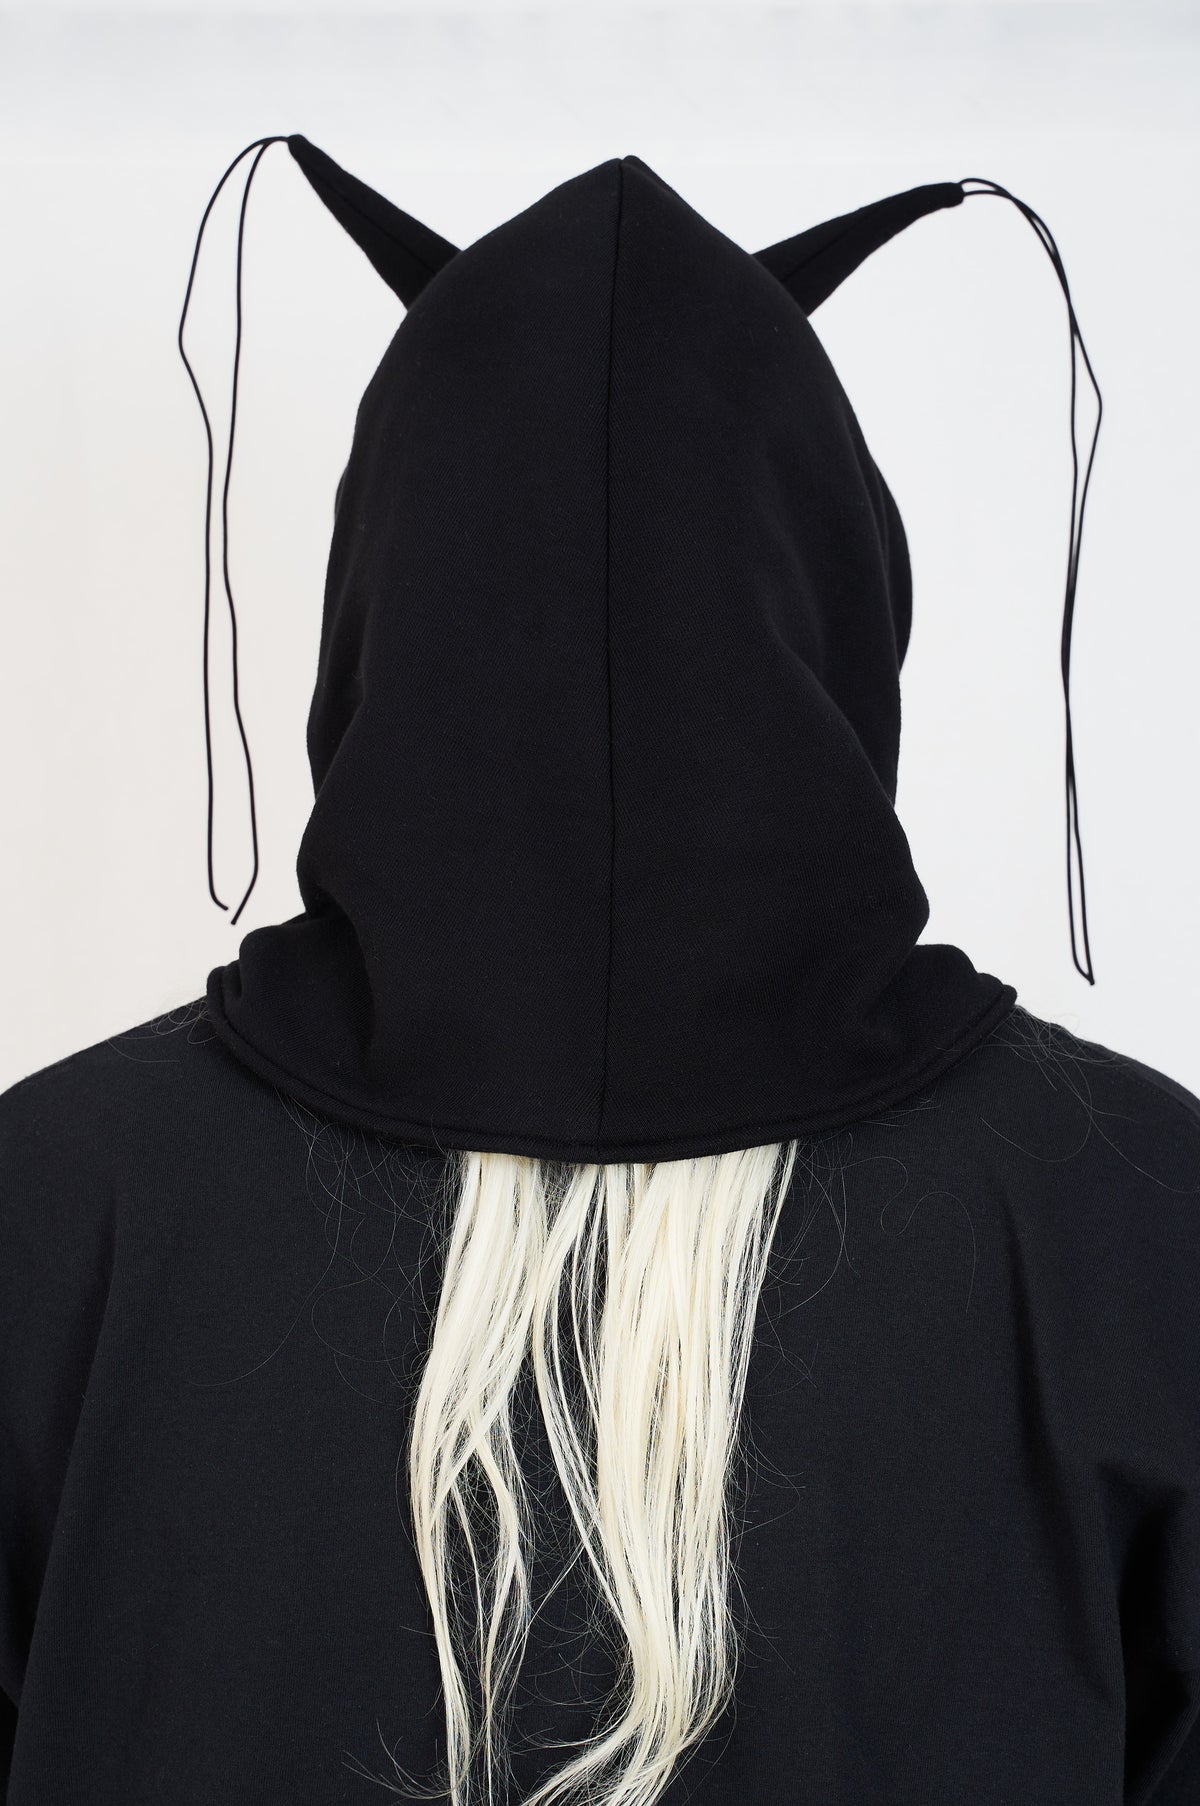 black hood with spikes